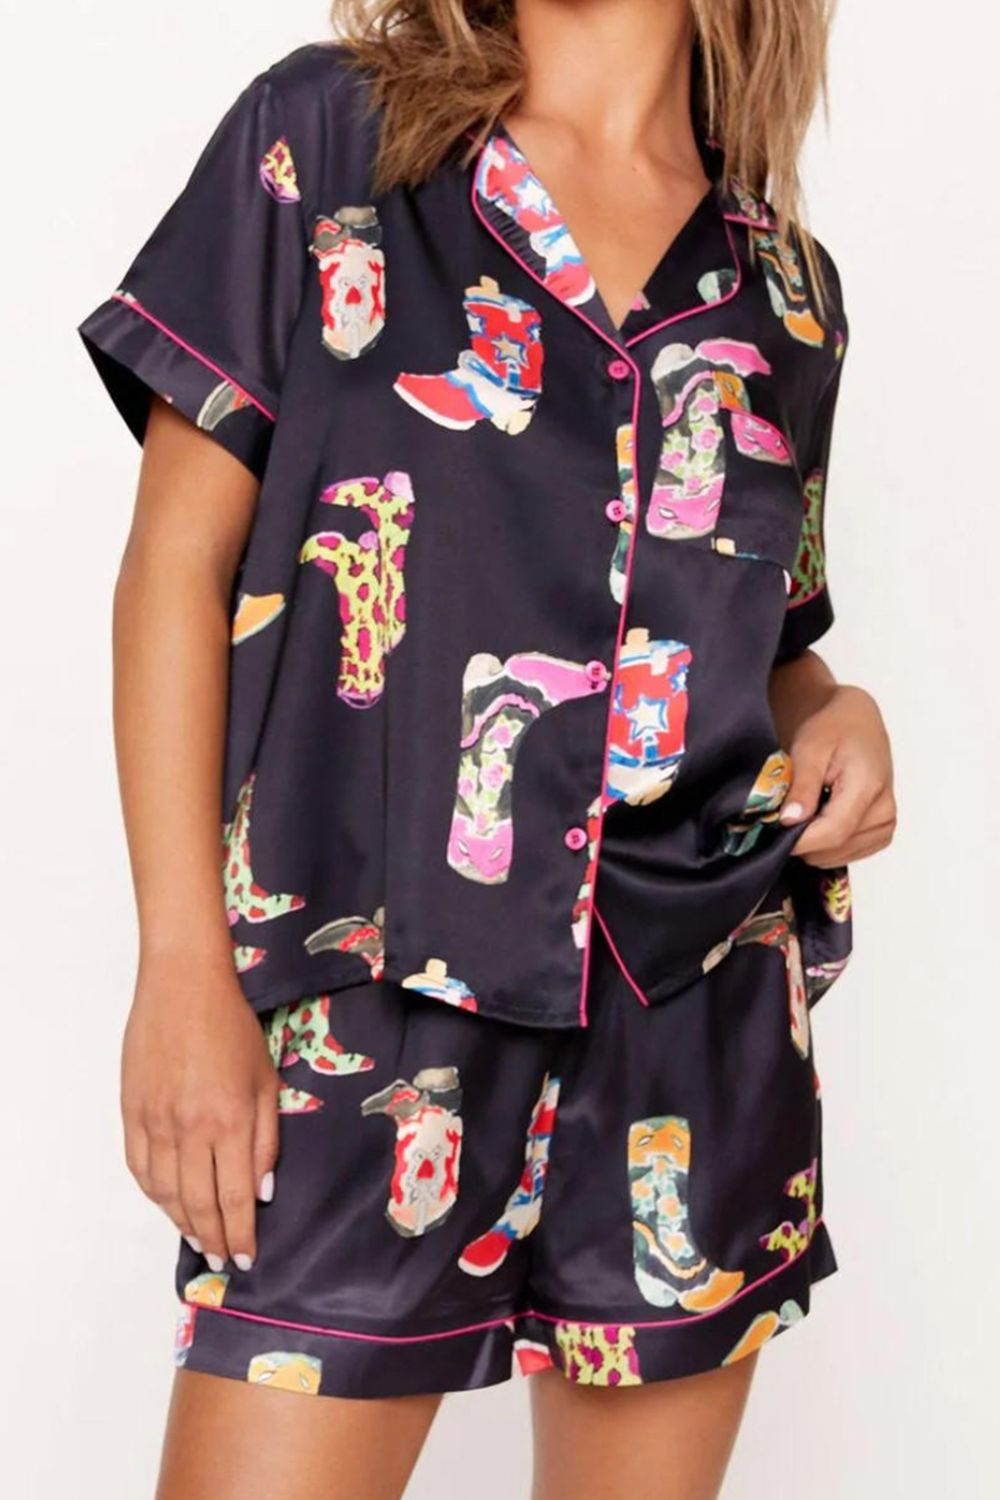 Printed Button Up Short Sleeve Top and Shorts Lounge Set - Tophatter Deals and Online Shopping - Electronics, Jewelry, Beauty, Health, Gadgets, Fashion - Tophatter's Discounts & Offers - tophatters